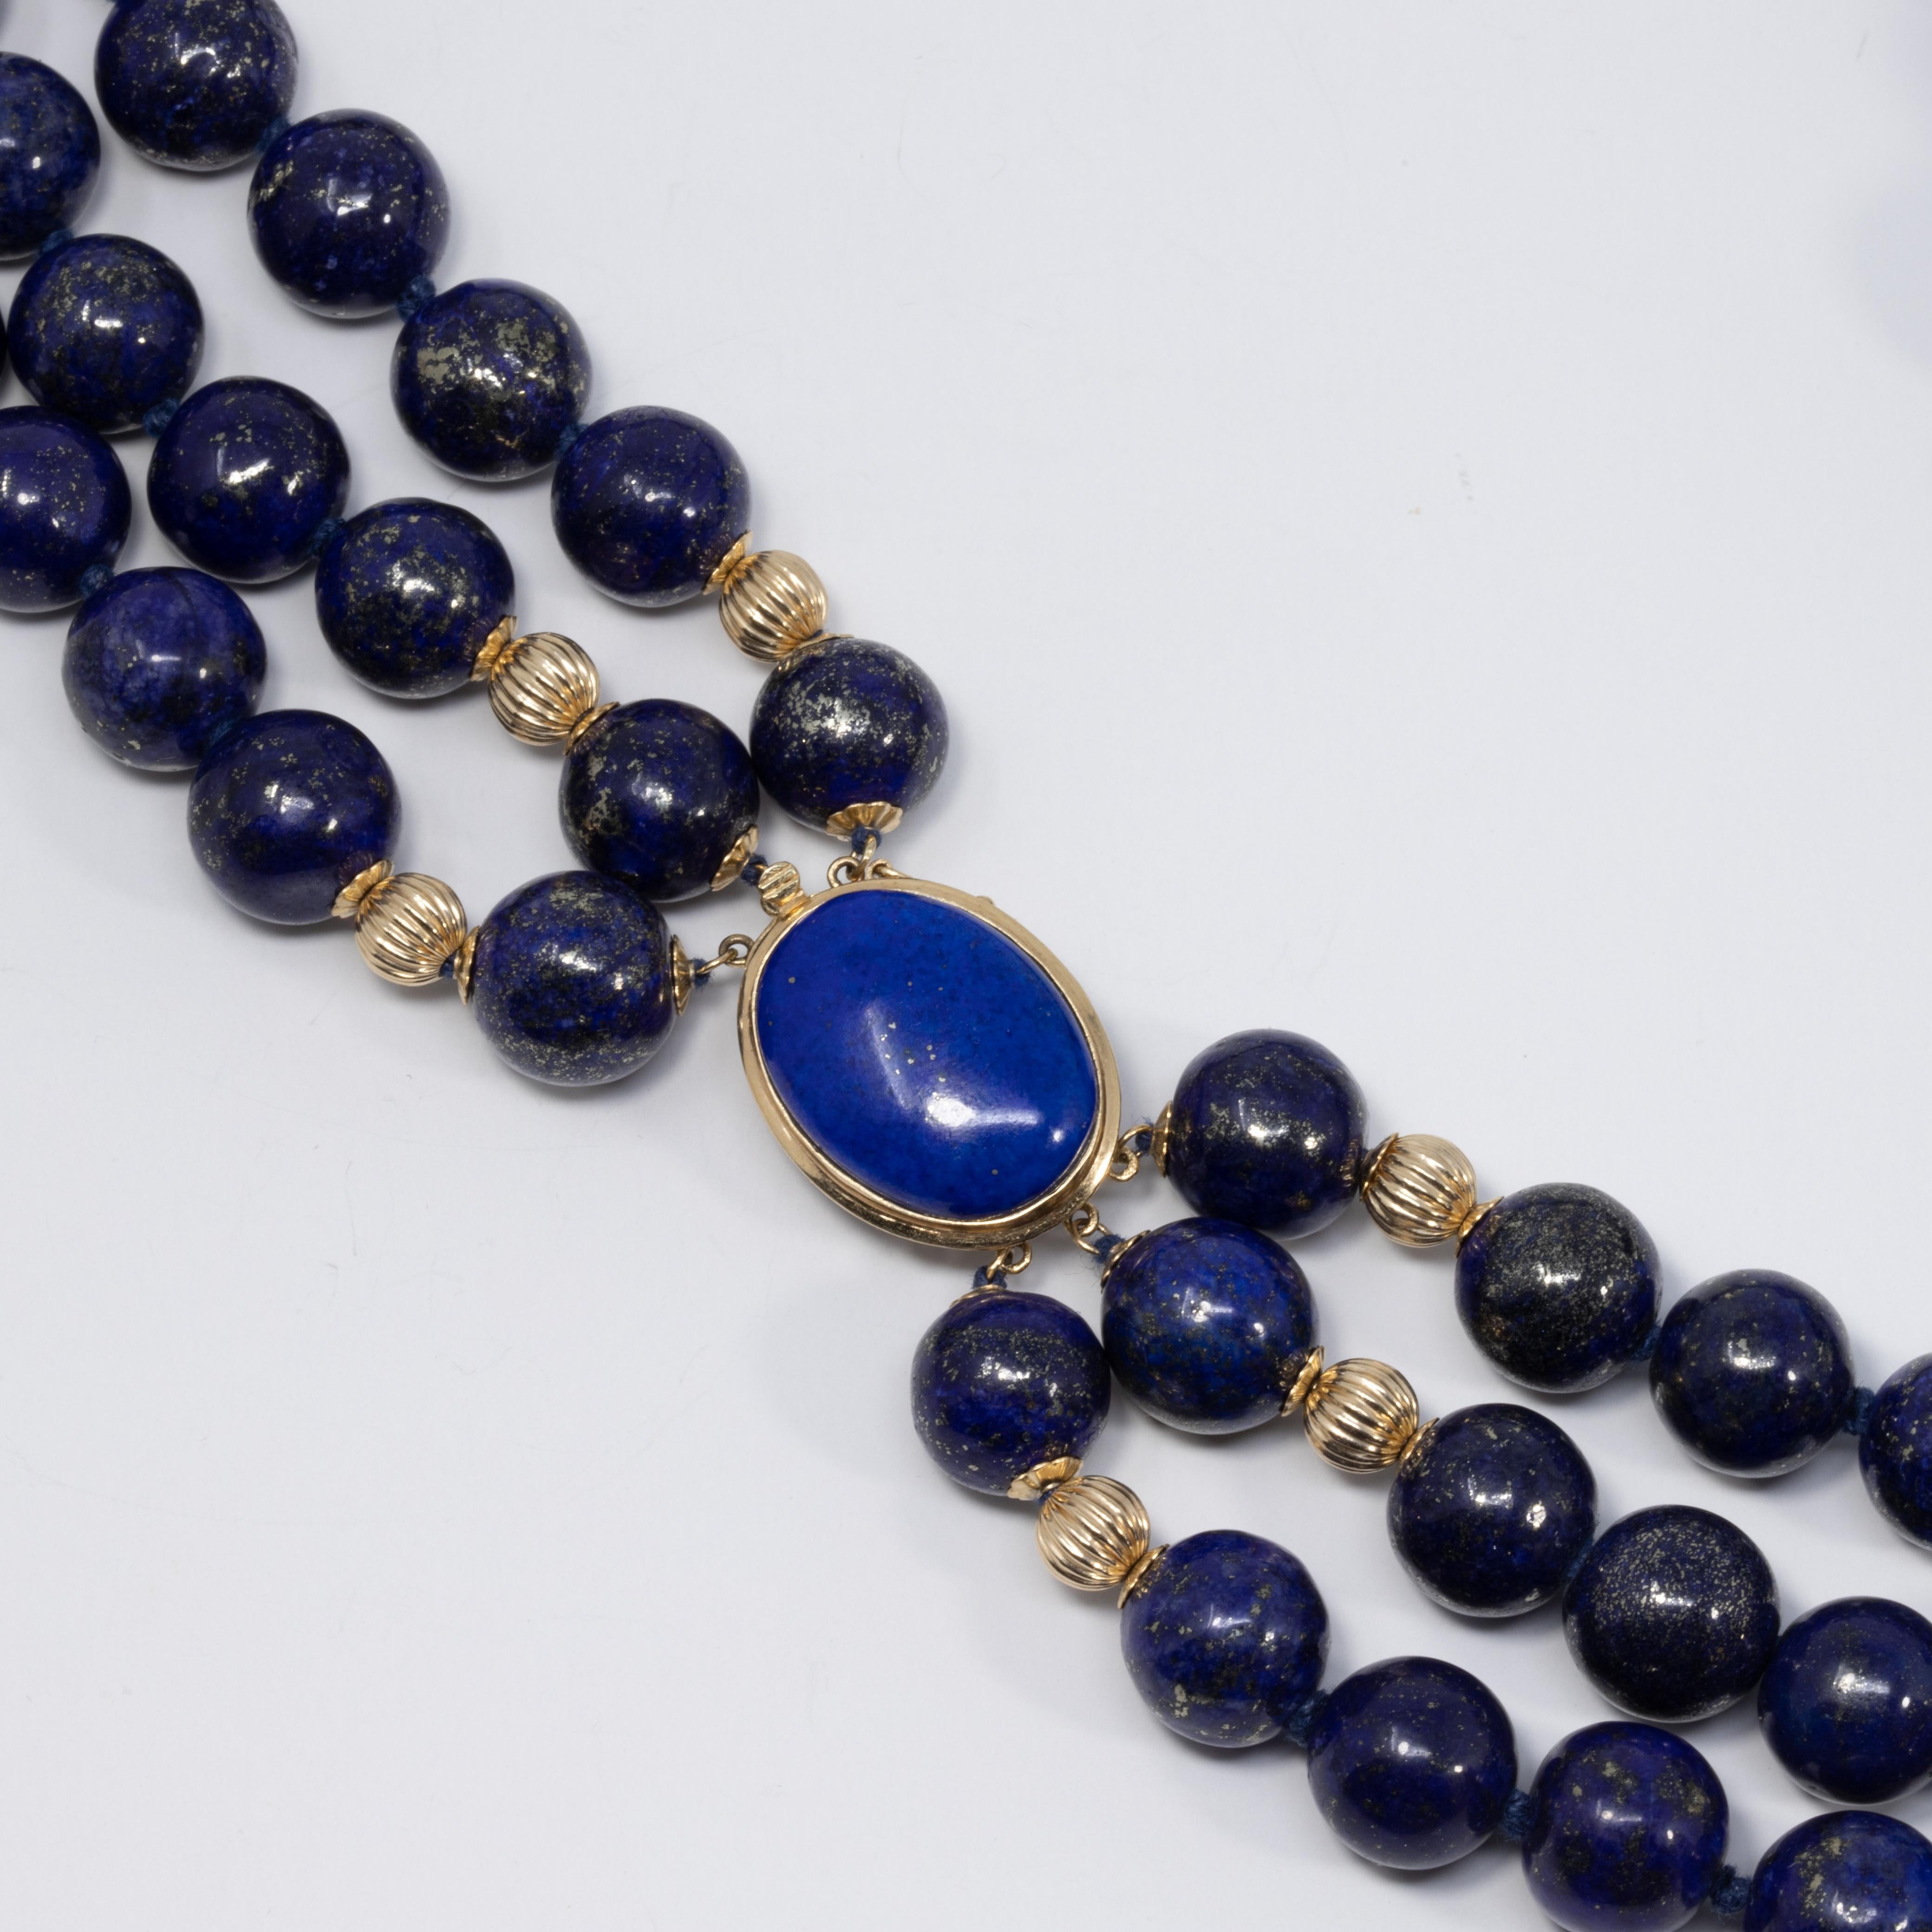 Lapiz Lazuli Triple Strand Knotted String Bead Necklace 14K Gold Clasp, Accents 2